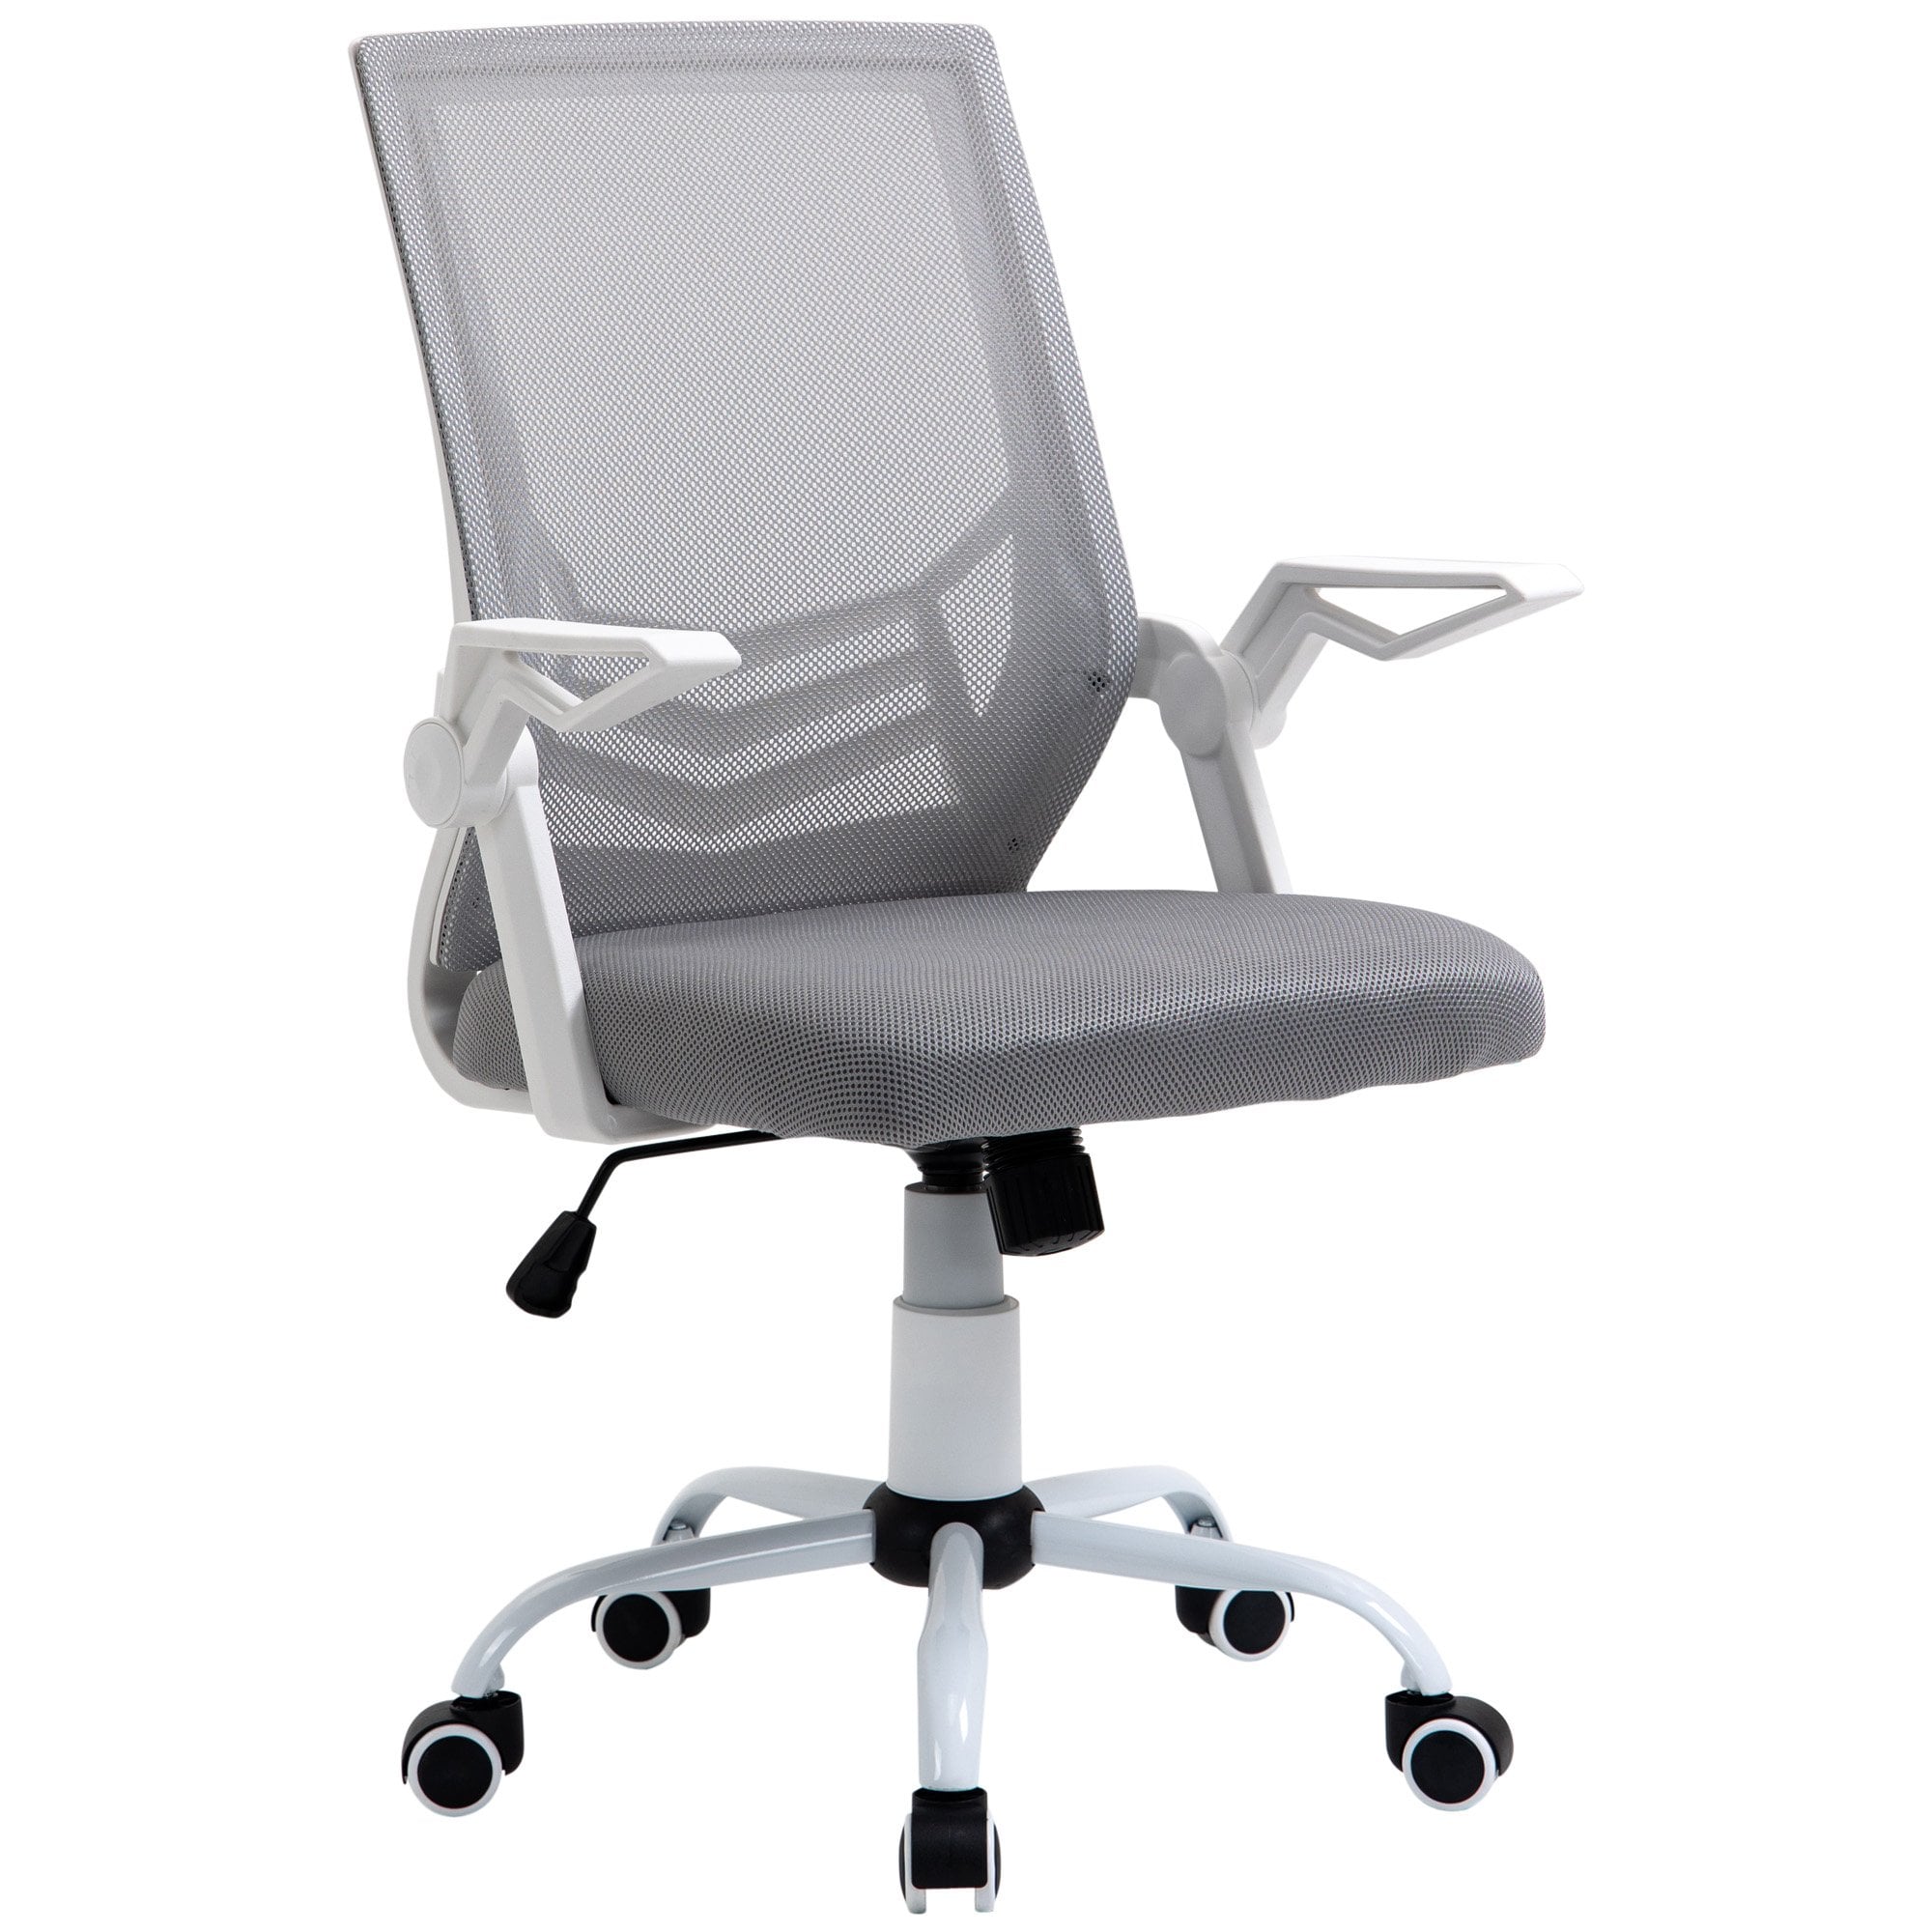 Vinsetto Mesh Swivel Office Chair for Home with Lumbar Back Support - Adjustable Height - Flip-Up Arm - Grey - CARTER  | TJ Hughes